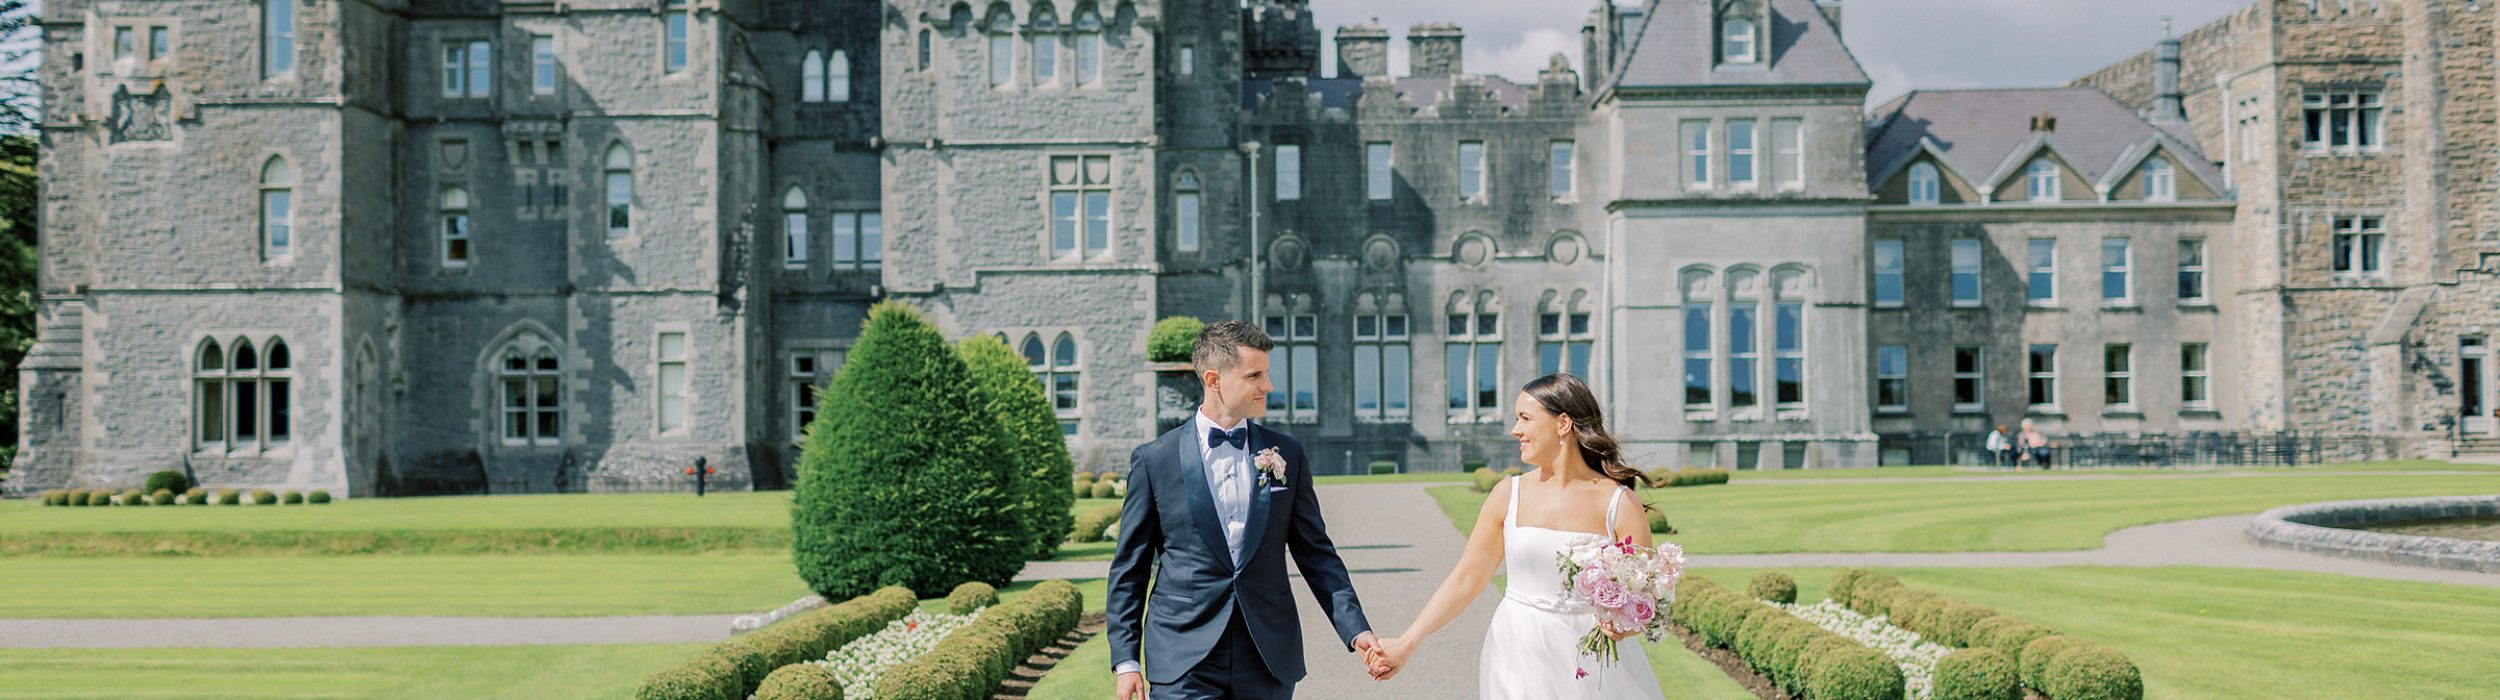 Wedding At The Lodge At Ashford Castle by Fine Art Wedding Photographer And Videographer Team In Ireland Wonder and Magic